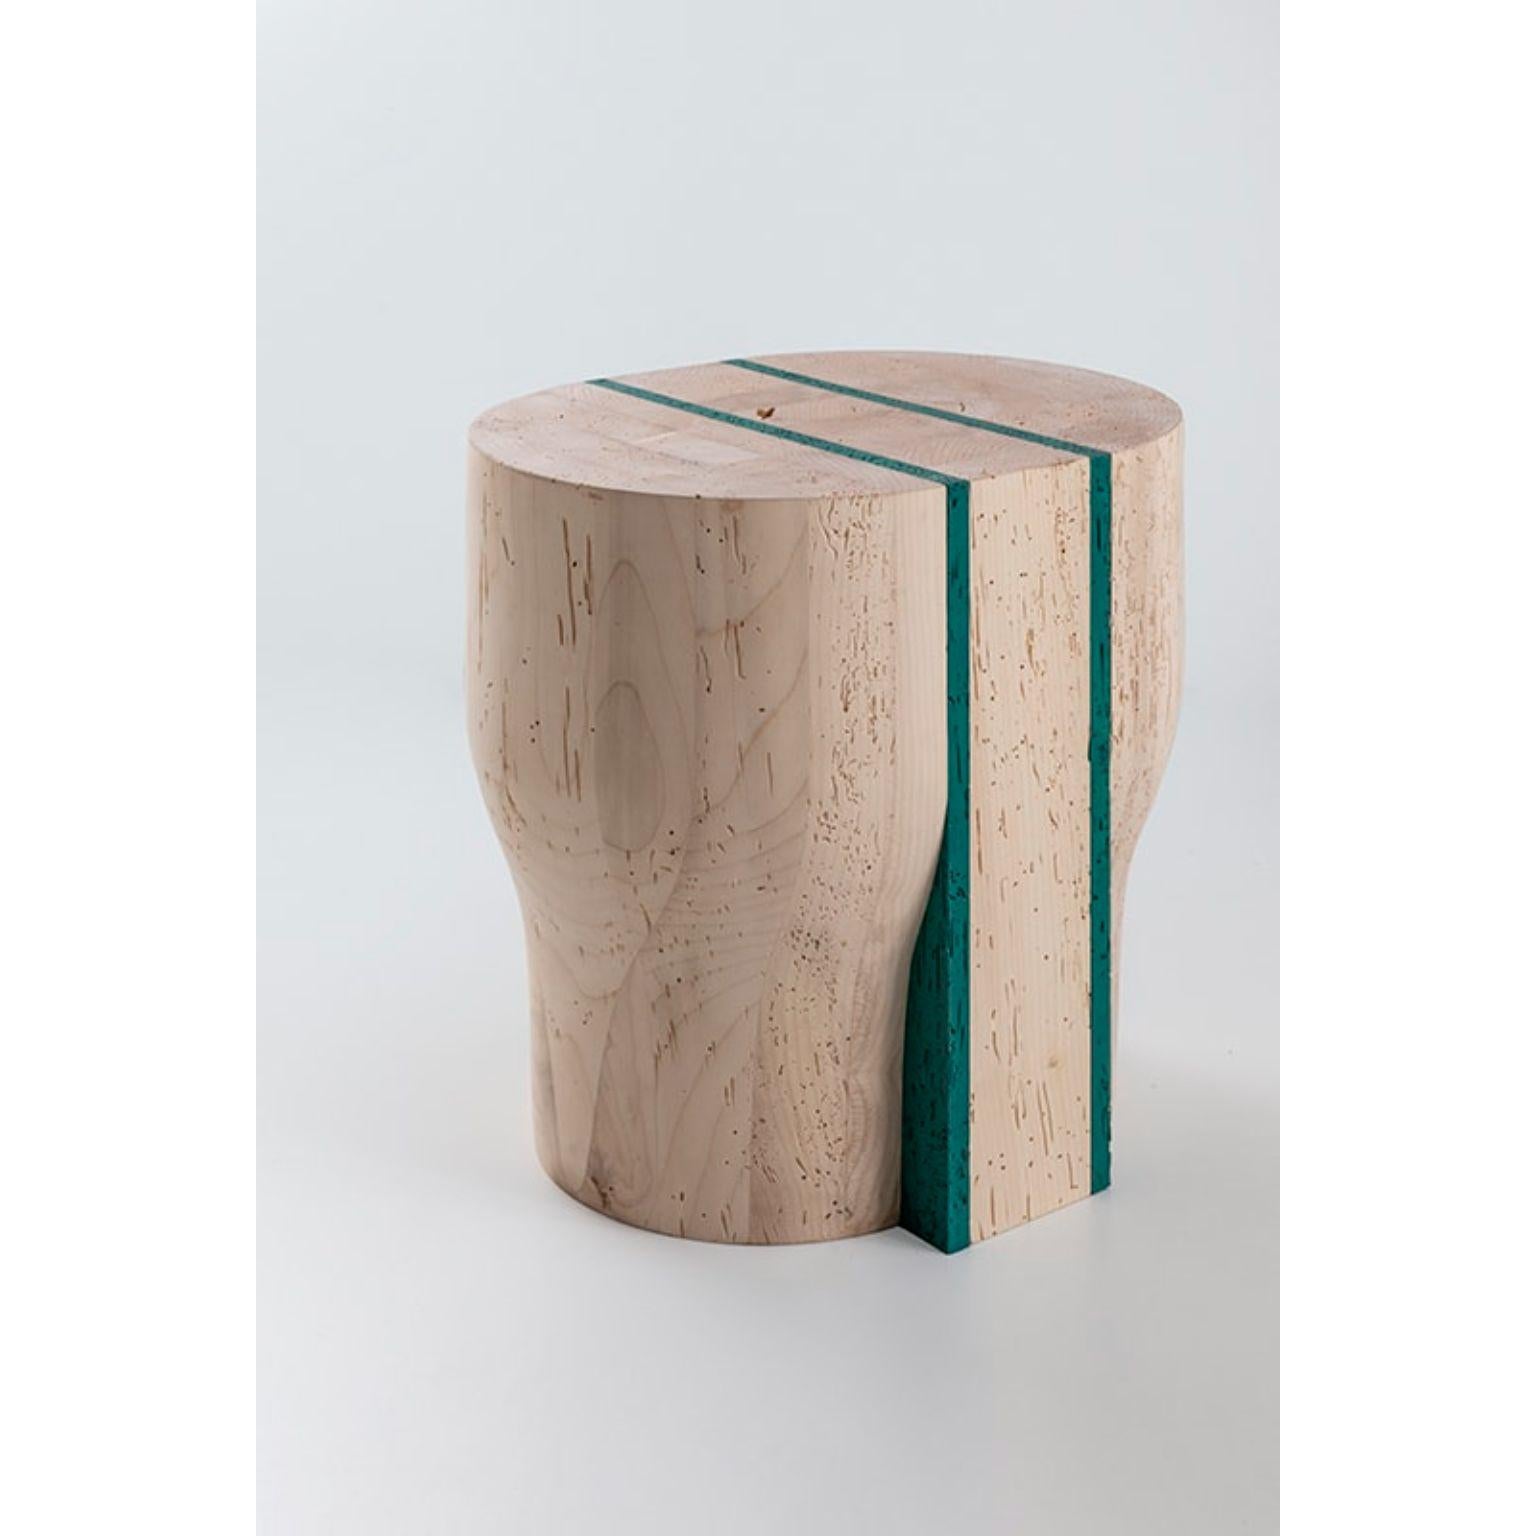 Jeunesse Green Stool by Secondome Edizioni and Studio F
Designer: Duccio Maria Gambi.
Dimensions: Ø 32 x H 43 cm.
Materials: Solid woodworm maple wood.

Collection / Production: Secondome + Studio F. This piece can be customized. Available finishes: